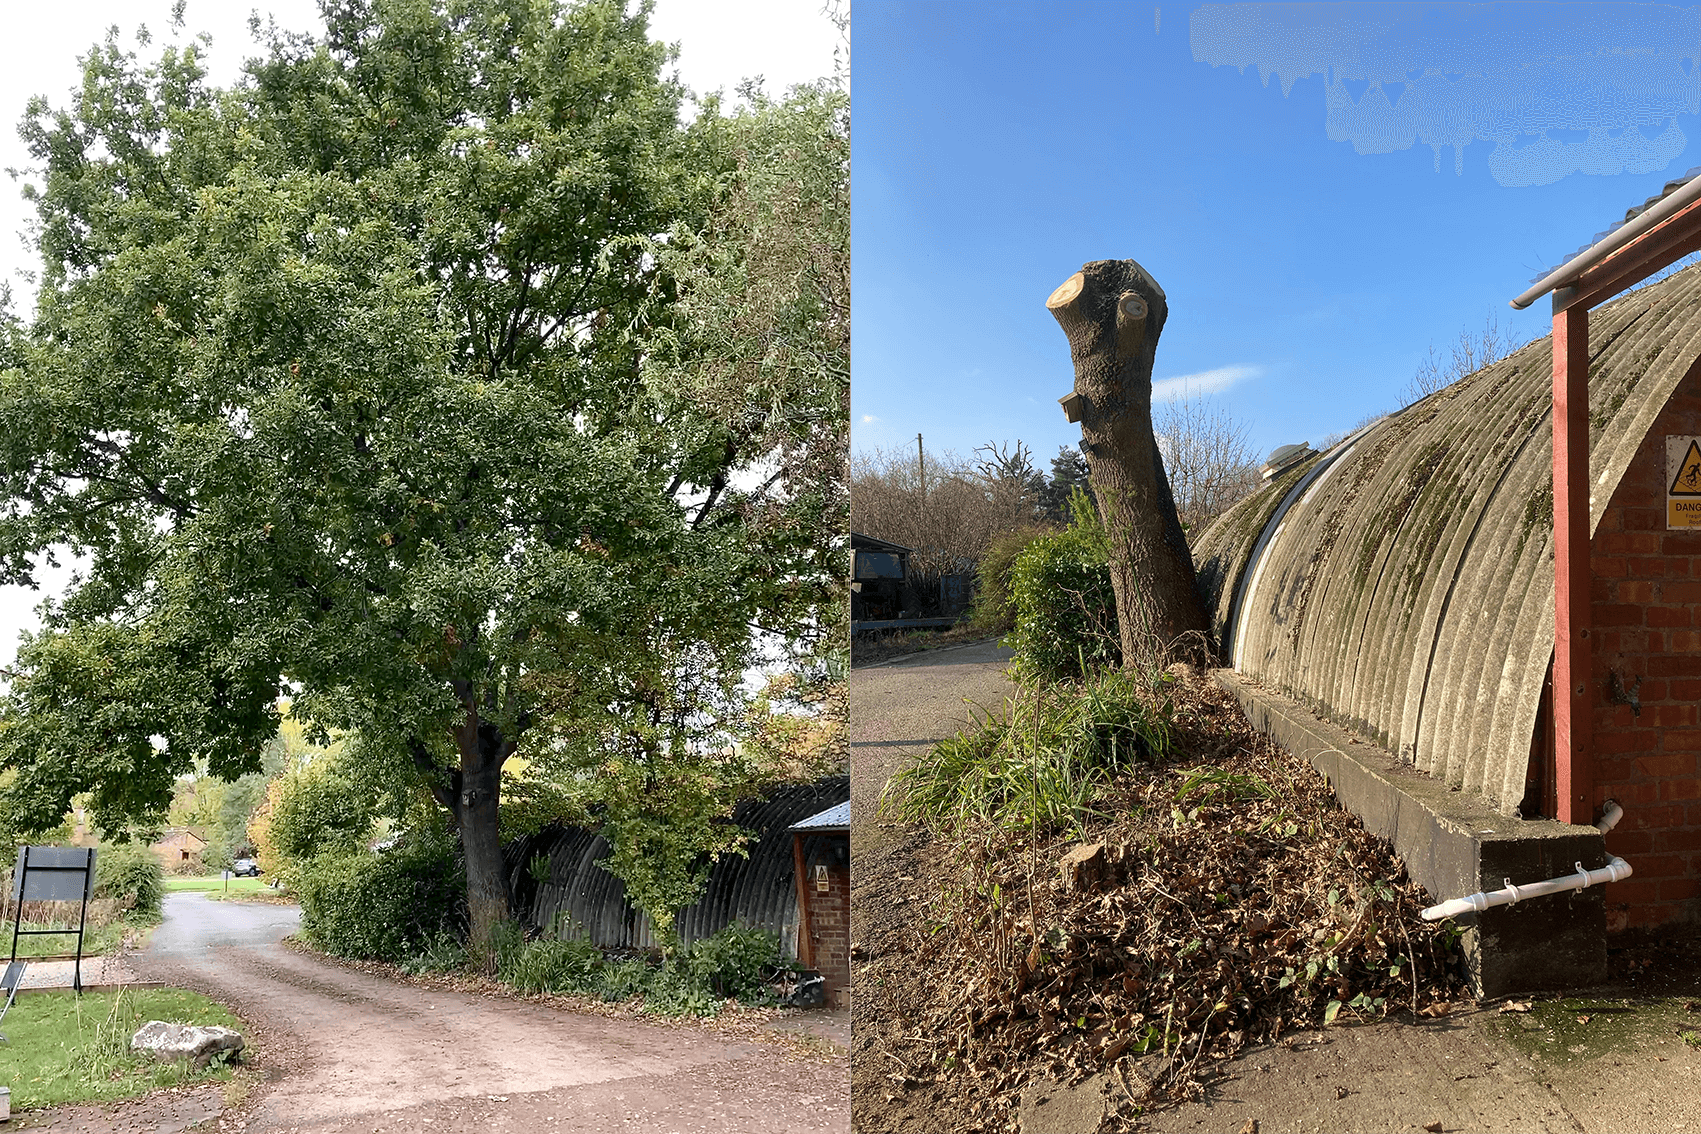 Before and after of the oak outside Bill Bird Shoes' Cotwolds workshop